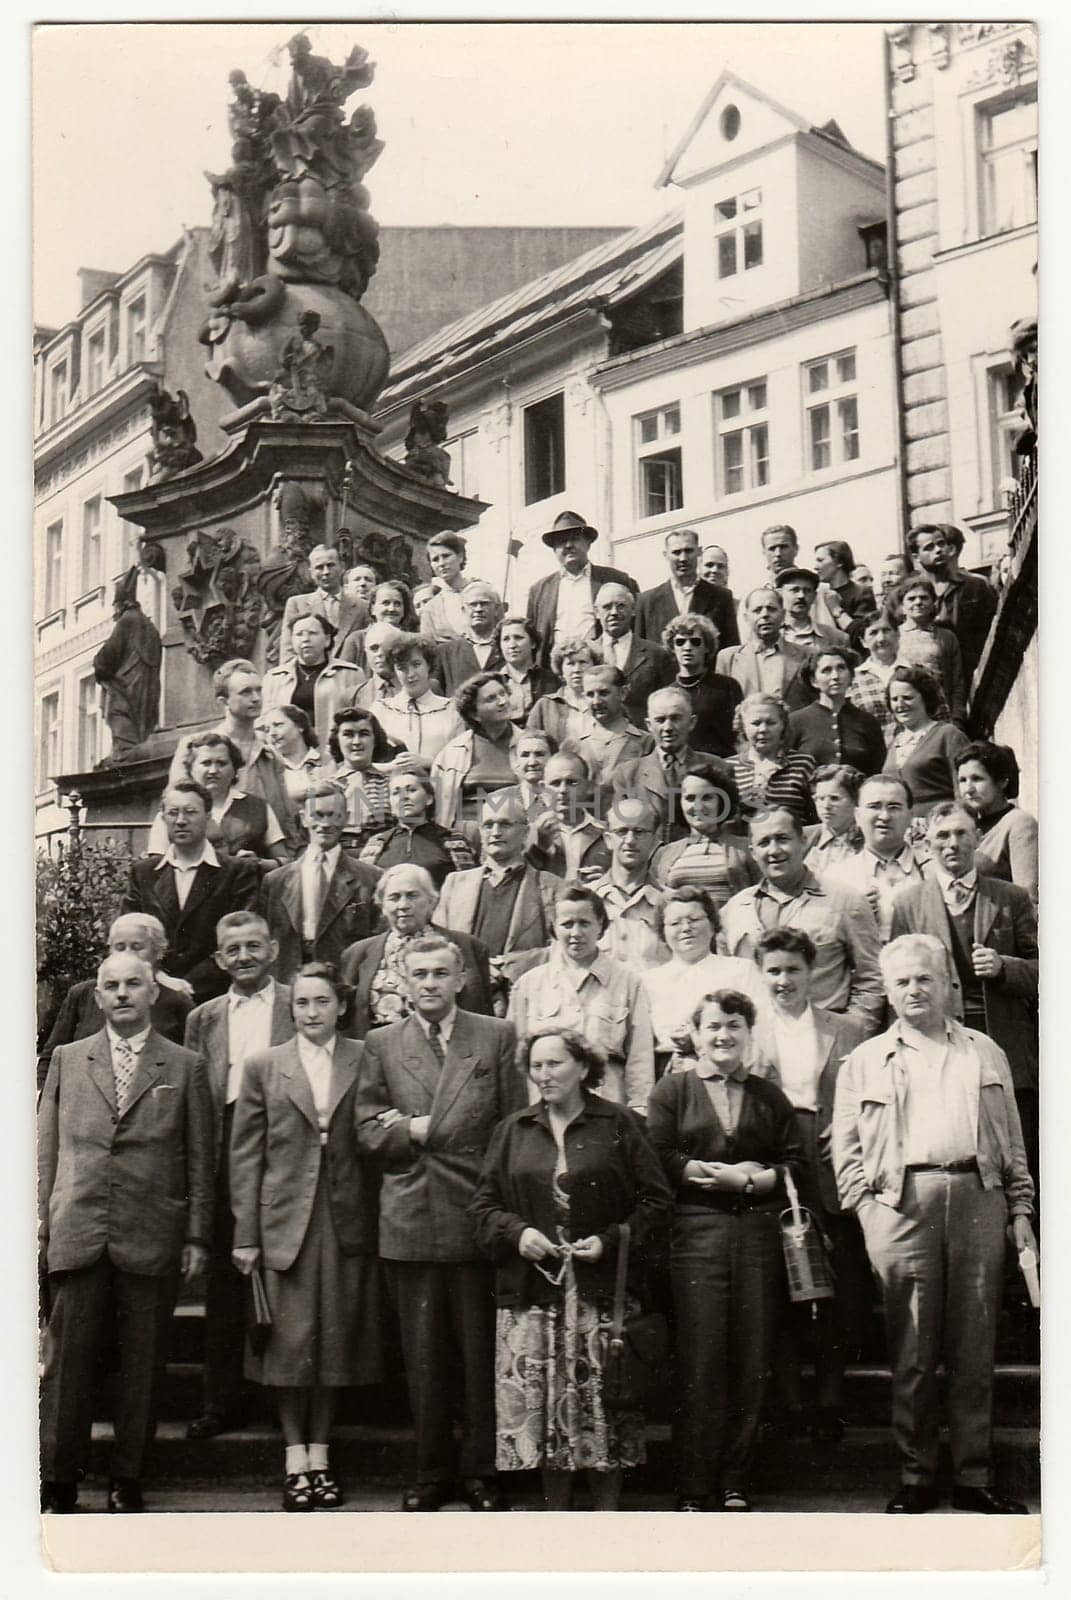 THE CZECHOSLOVAK SOCIALIST REPUBLIC - CIRCA 1970s: Vintage photo shows group of people on vacation.